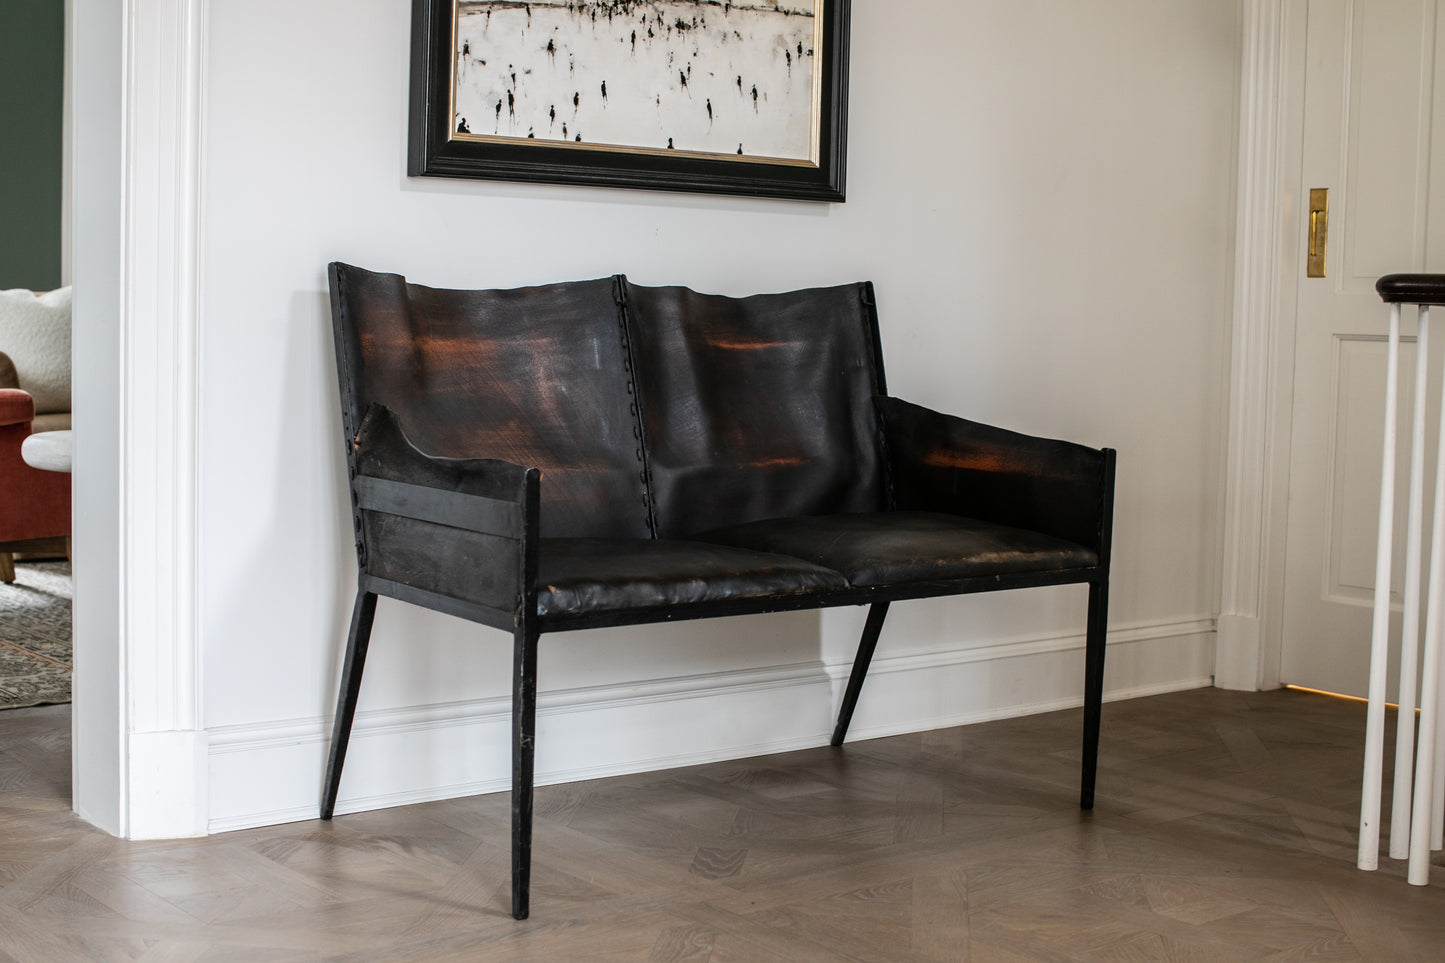 Iron & Leather Settee In the Manner of Jean-Michel Frank